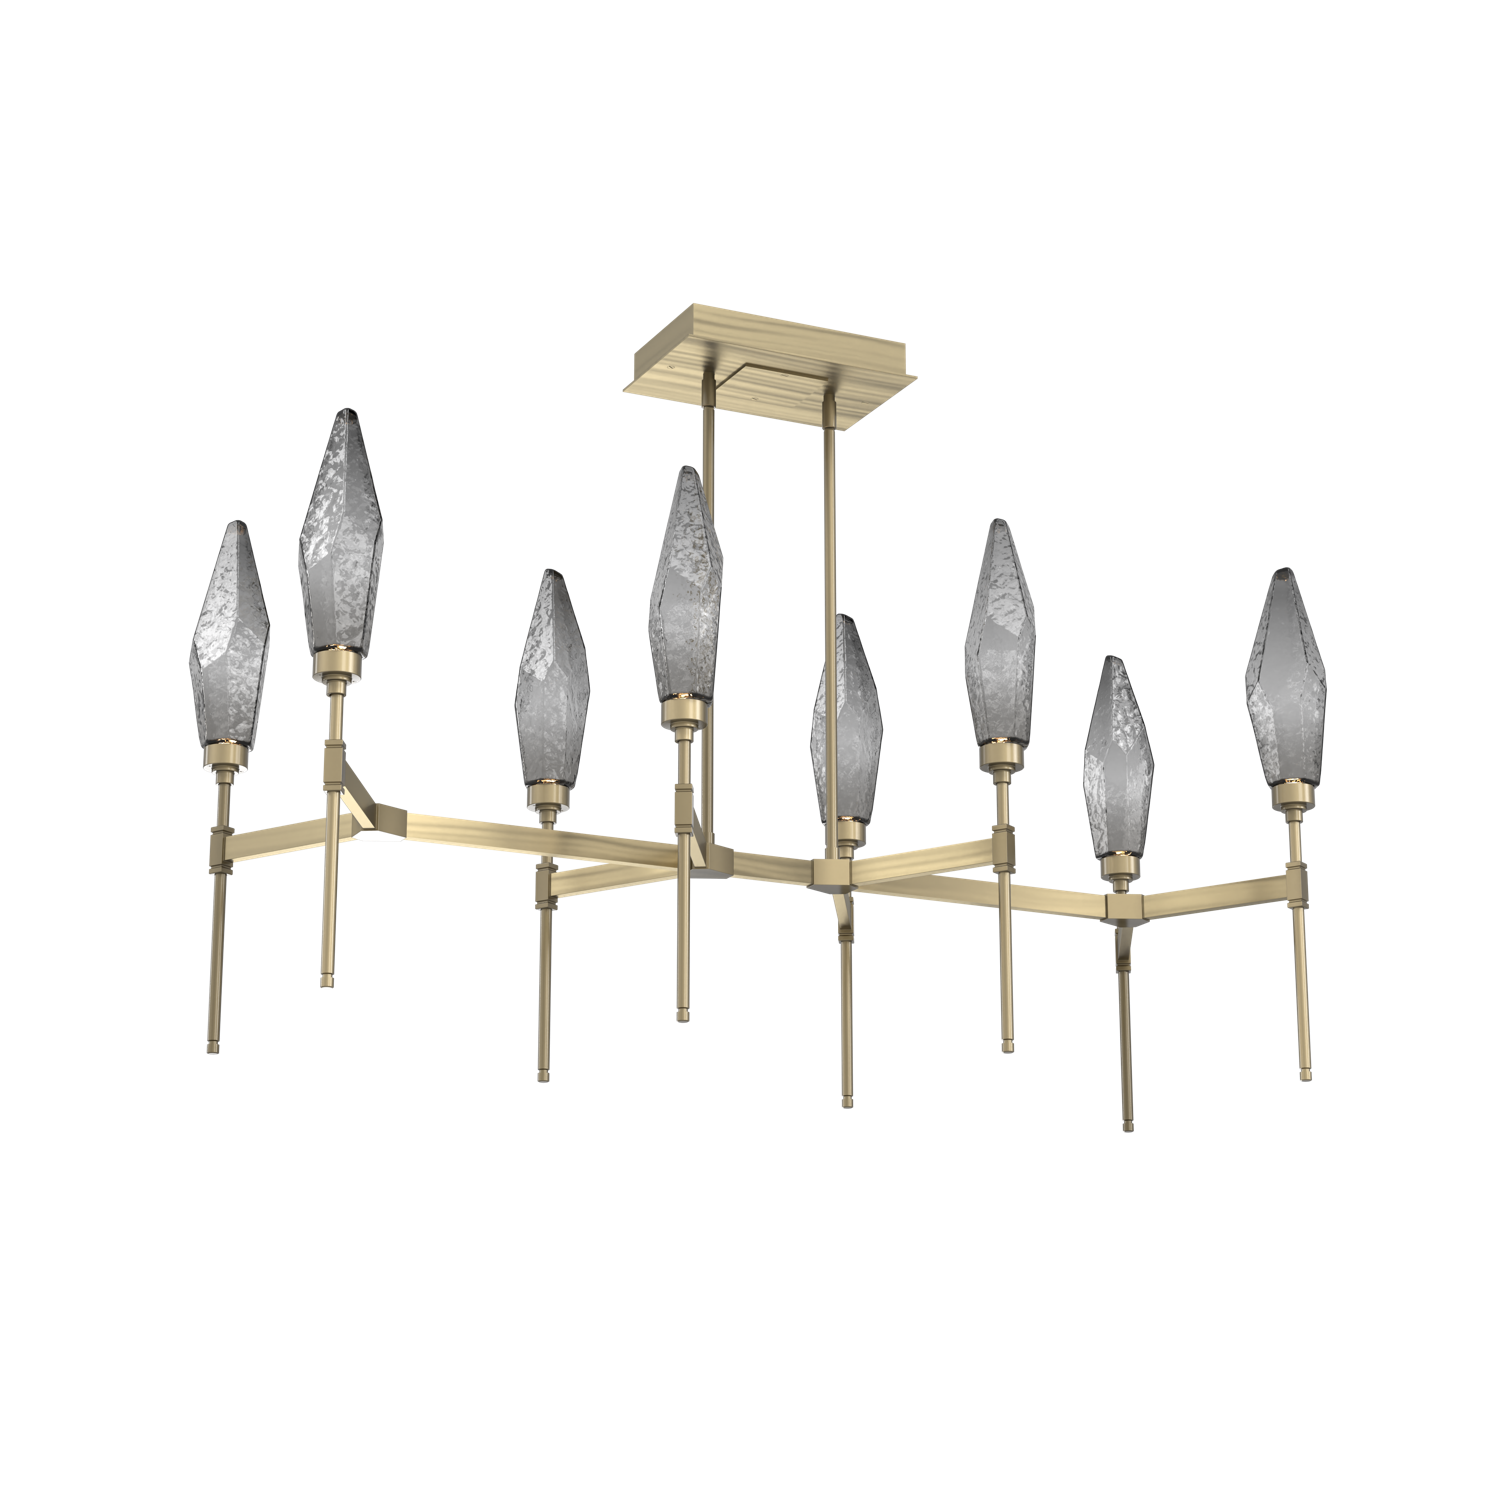 PLB0050-48-HB-CS-Hammerton-Studio-Rock-Crystal-48-inch-linear-belvedere-chandelier-with-heritage-brass-finish-and-chilled-smoke-glass-shades-and-LED-lamping